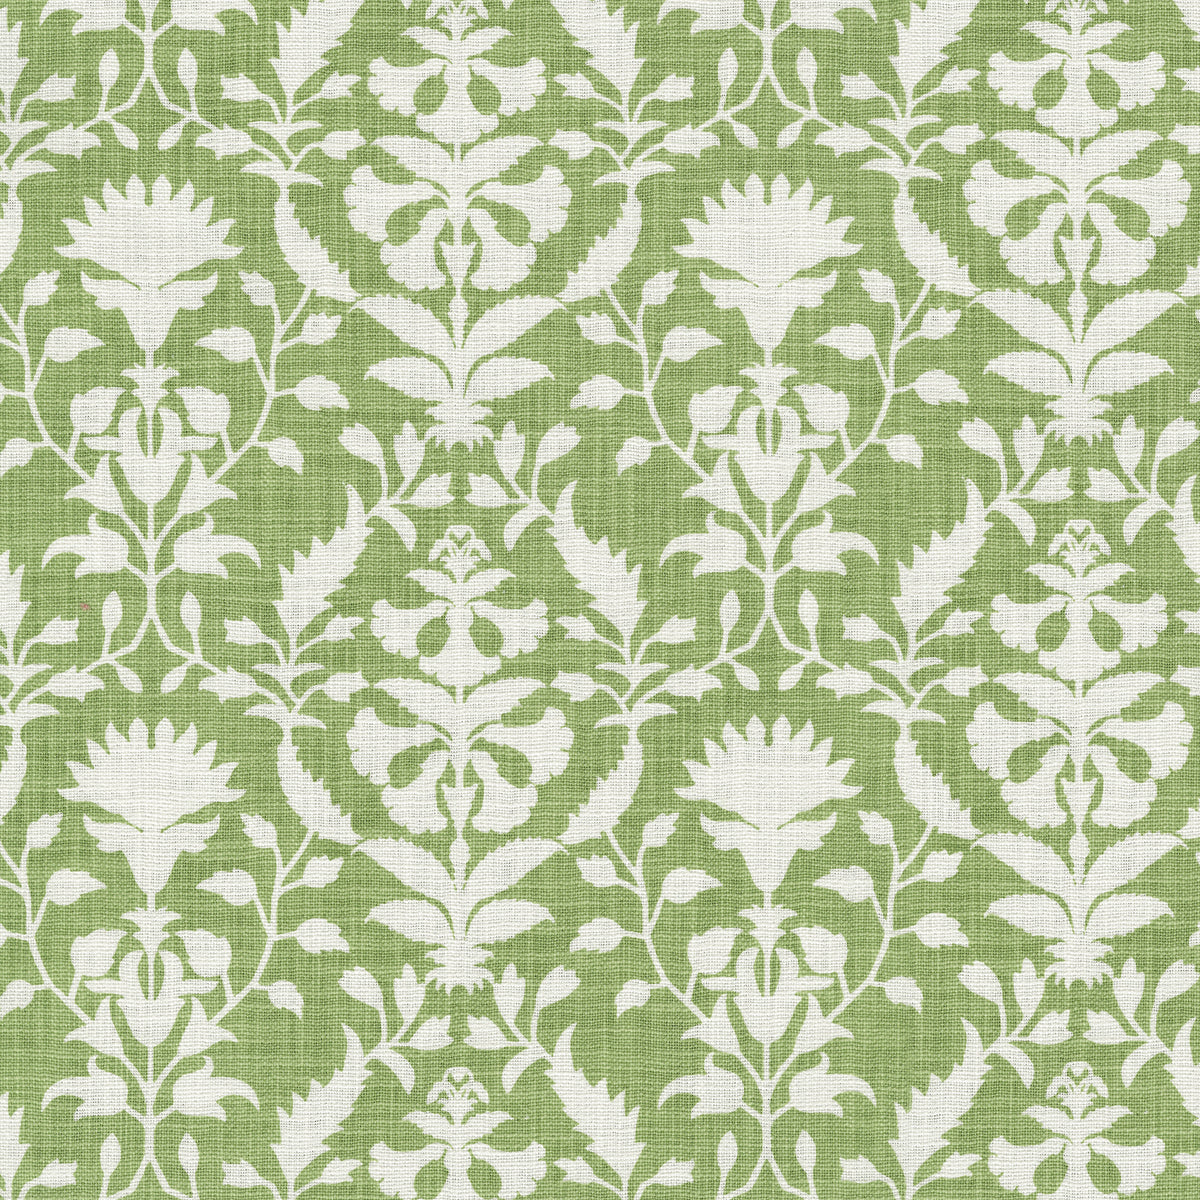 P/K Lifestyles Peacefulness - Willow 411740 Upholstery Fabric